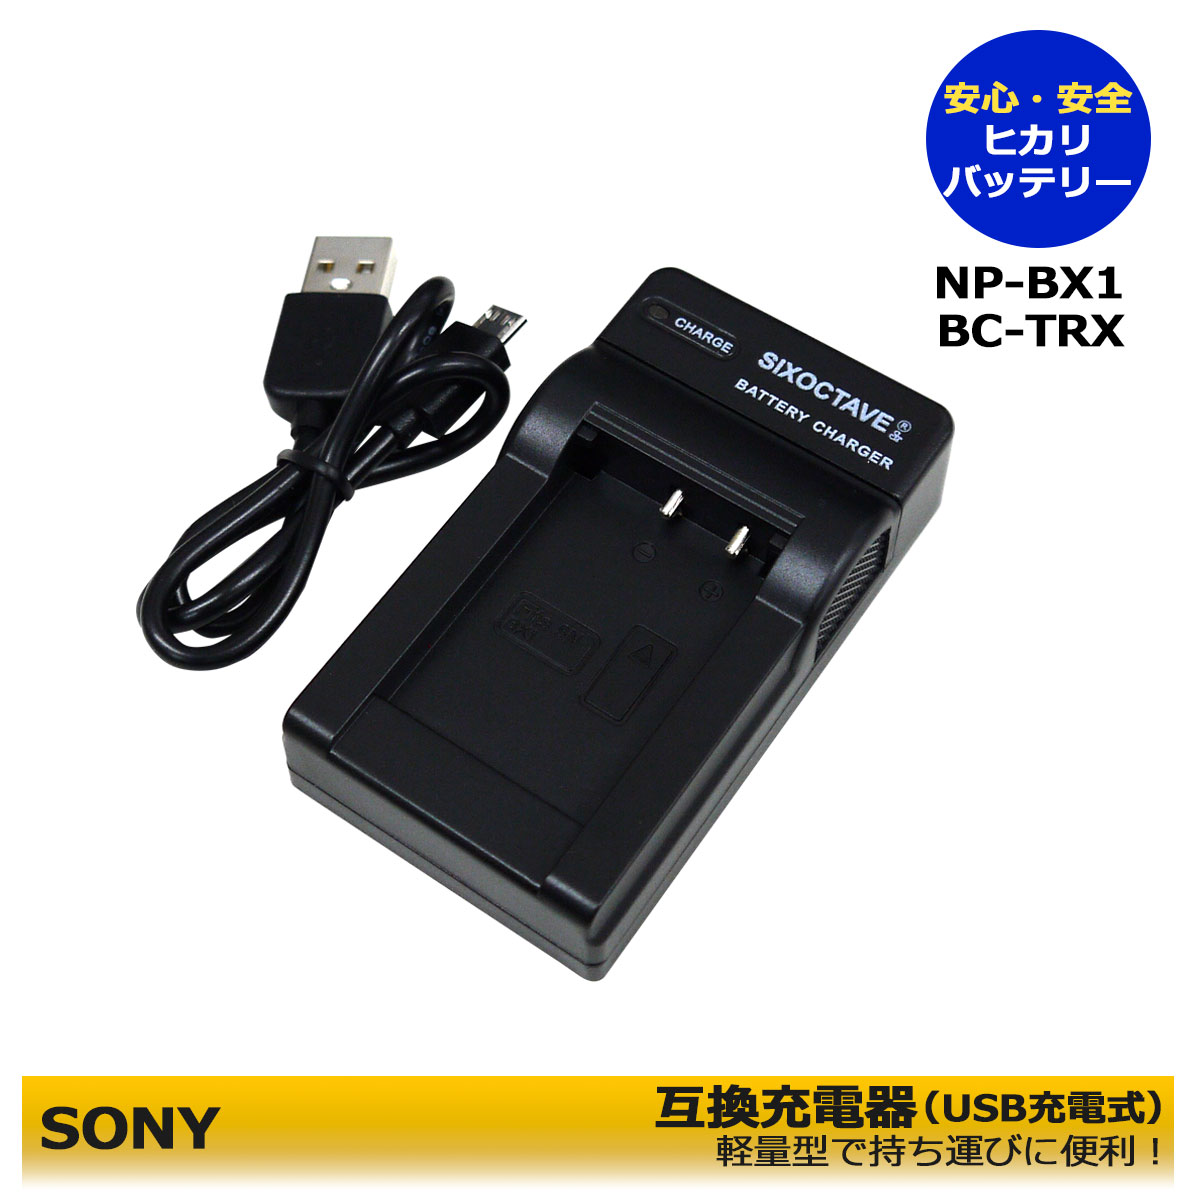 NP-BX1SONY ̵ۡߴŴUSBżˡHDR-AS15 / HDR-AS30V / HDR-AS30VR / HDR-AS50 / HDR-AS50R / HDR-AS100V / HDR-AS100VR / HDR-AS200V / HDR-AS300 / HDR-A...